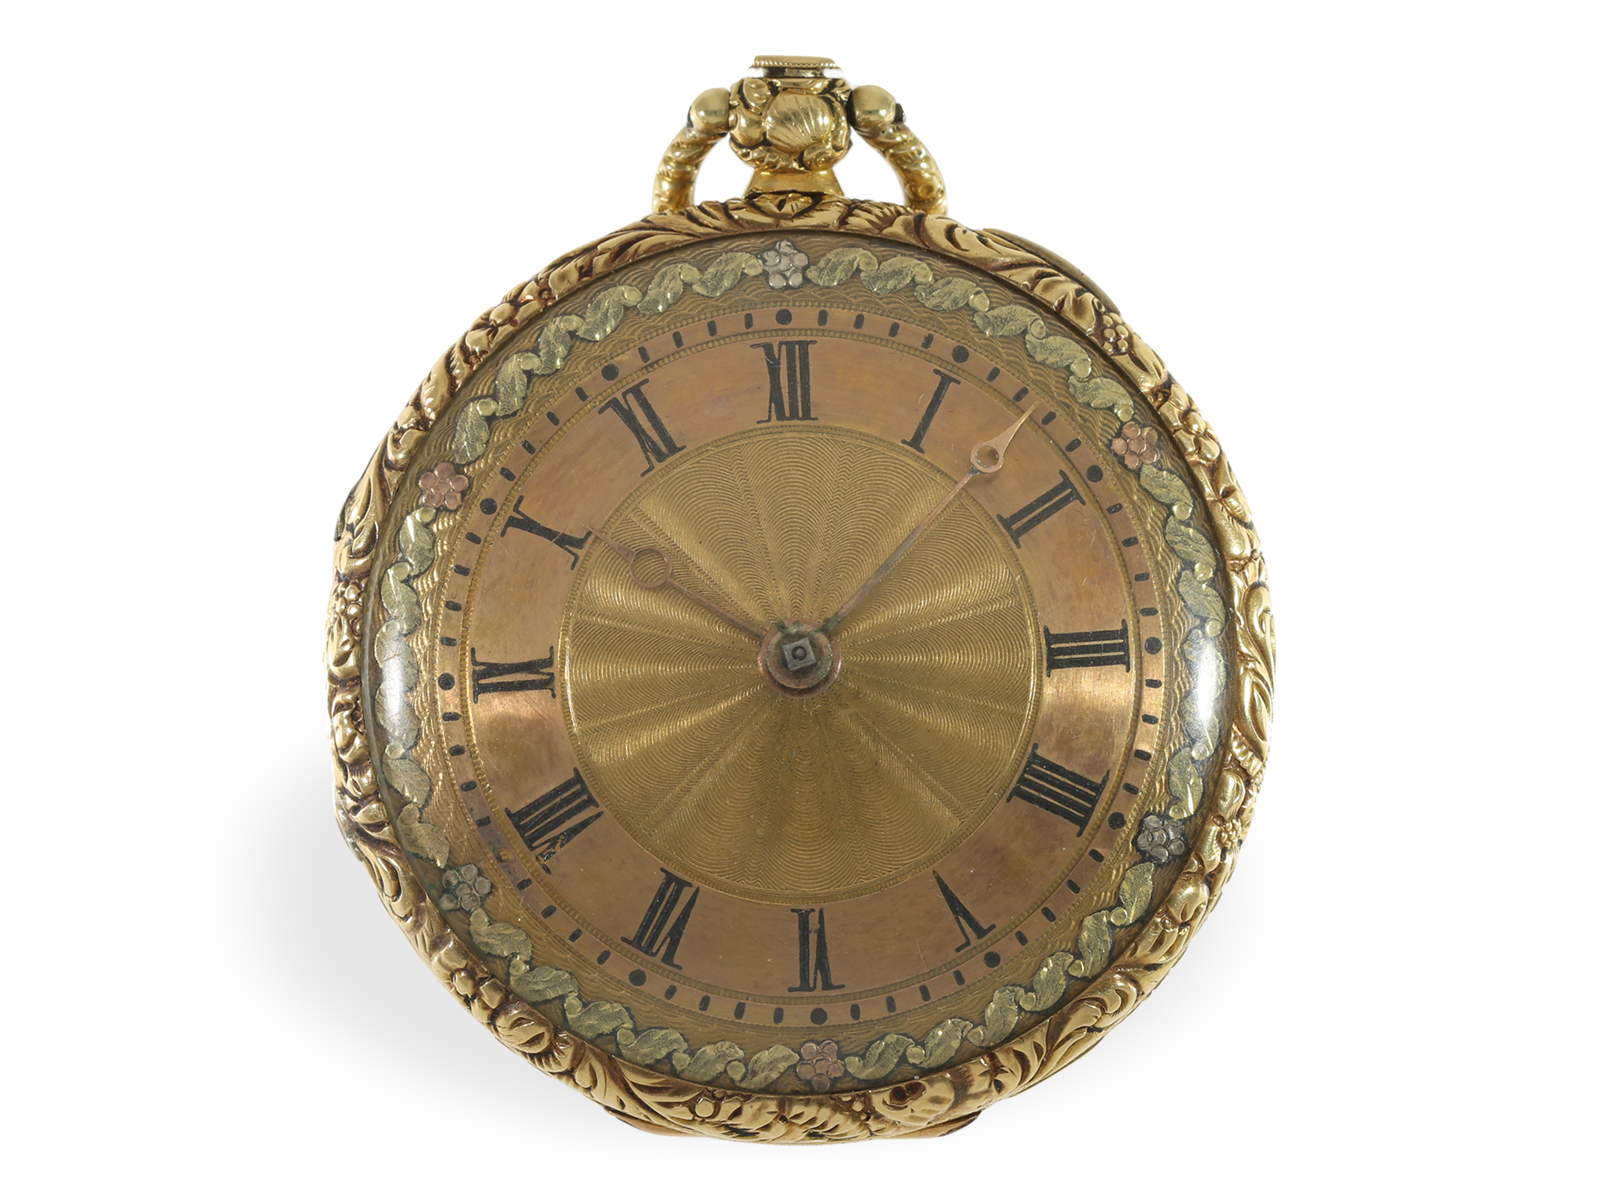 Pocket watch: gold verge watch from around 1830, owned by the Falinskys (manor)